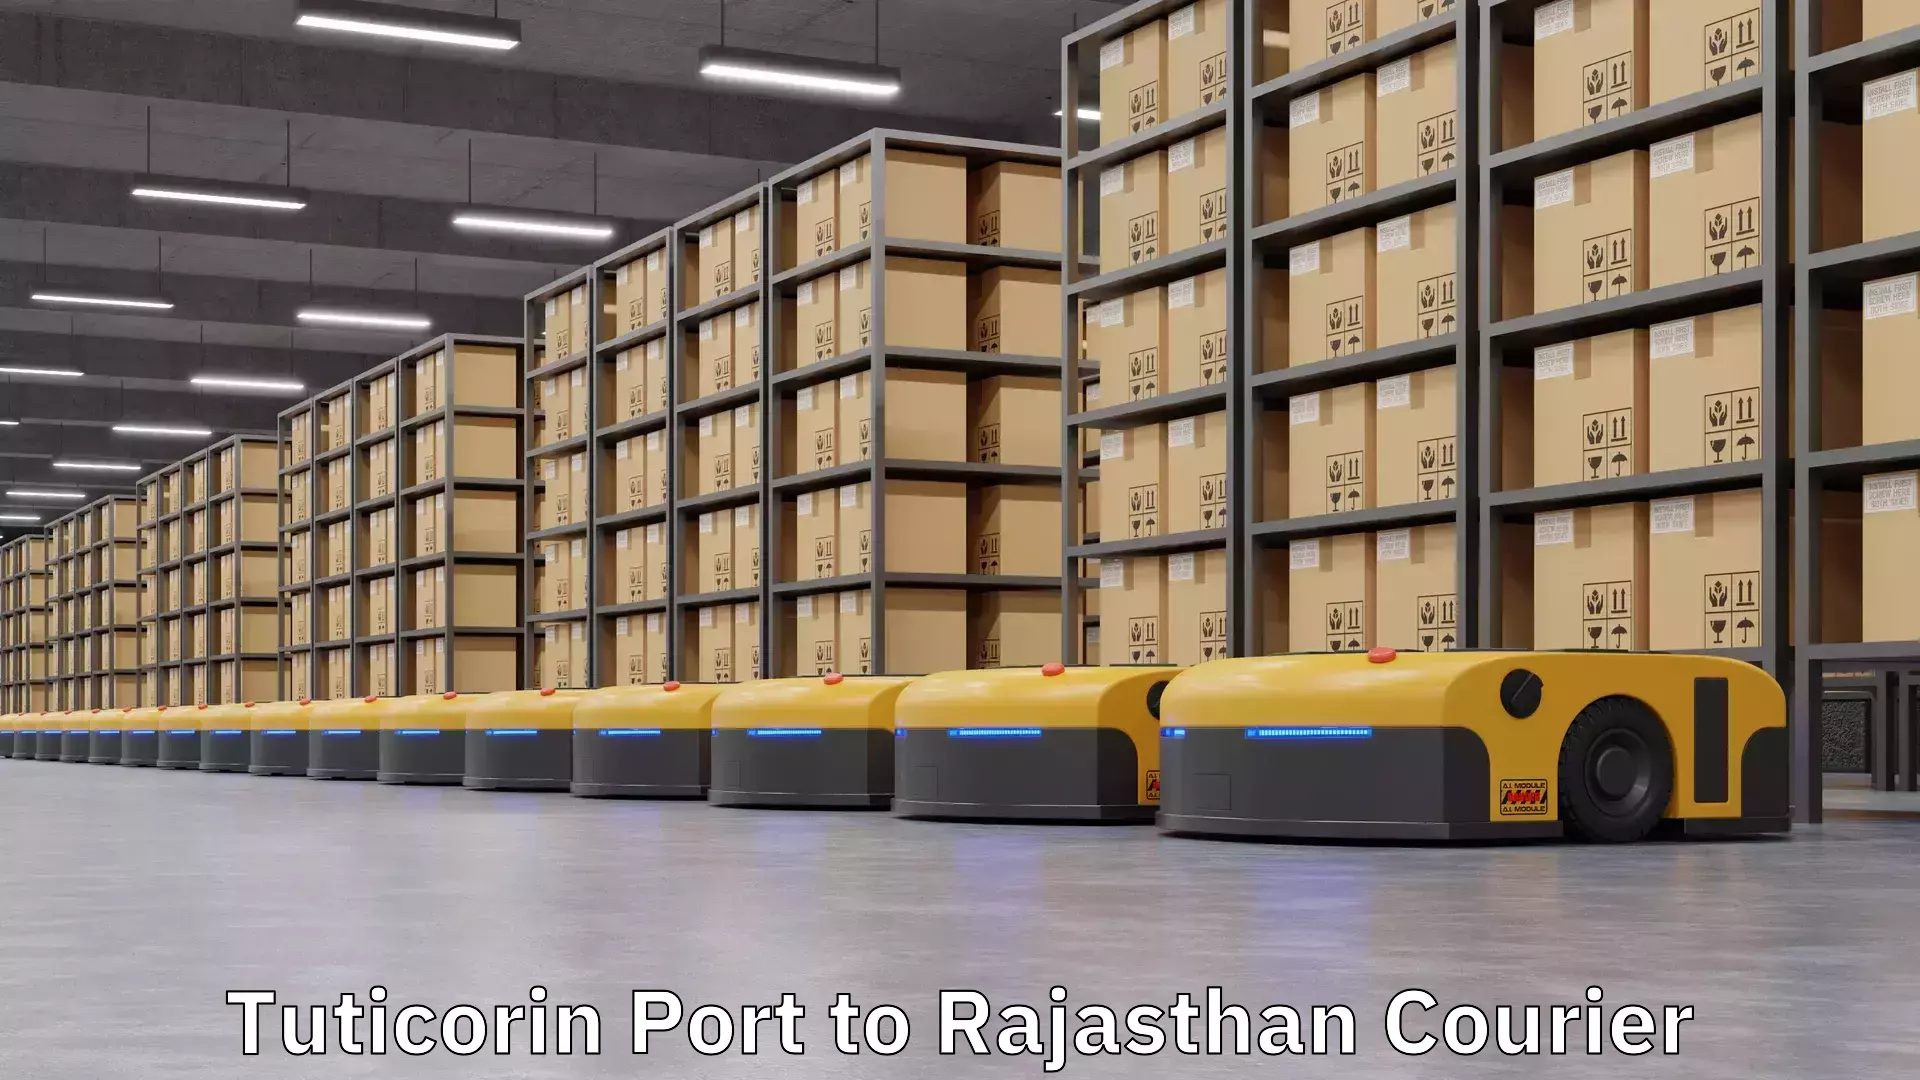 Flexible delivery scheduling Tuticorin Port to Rajasthan